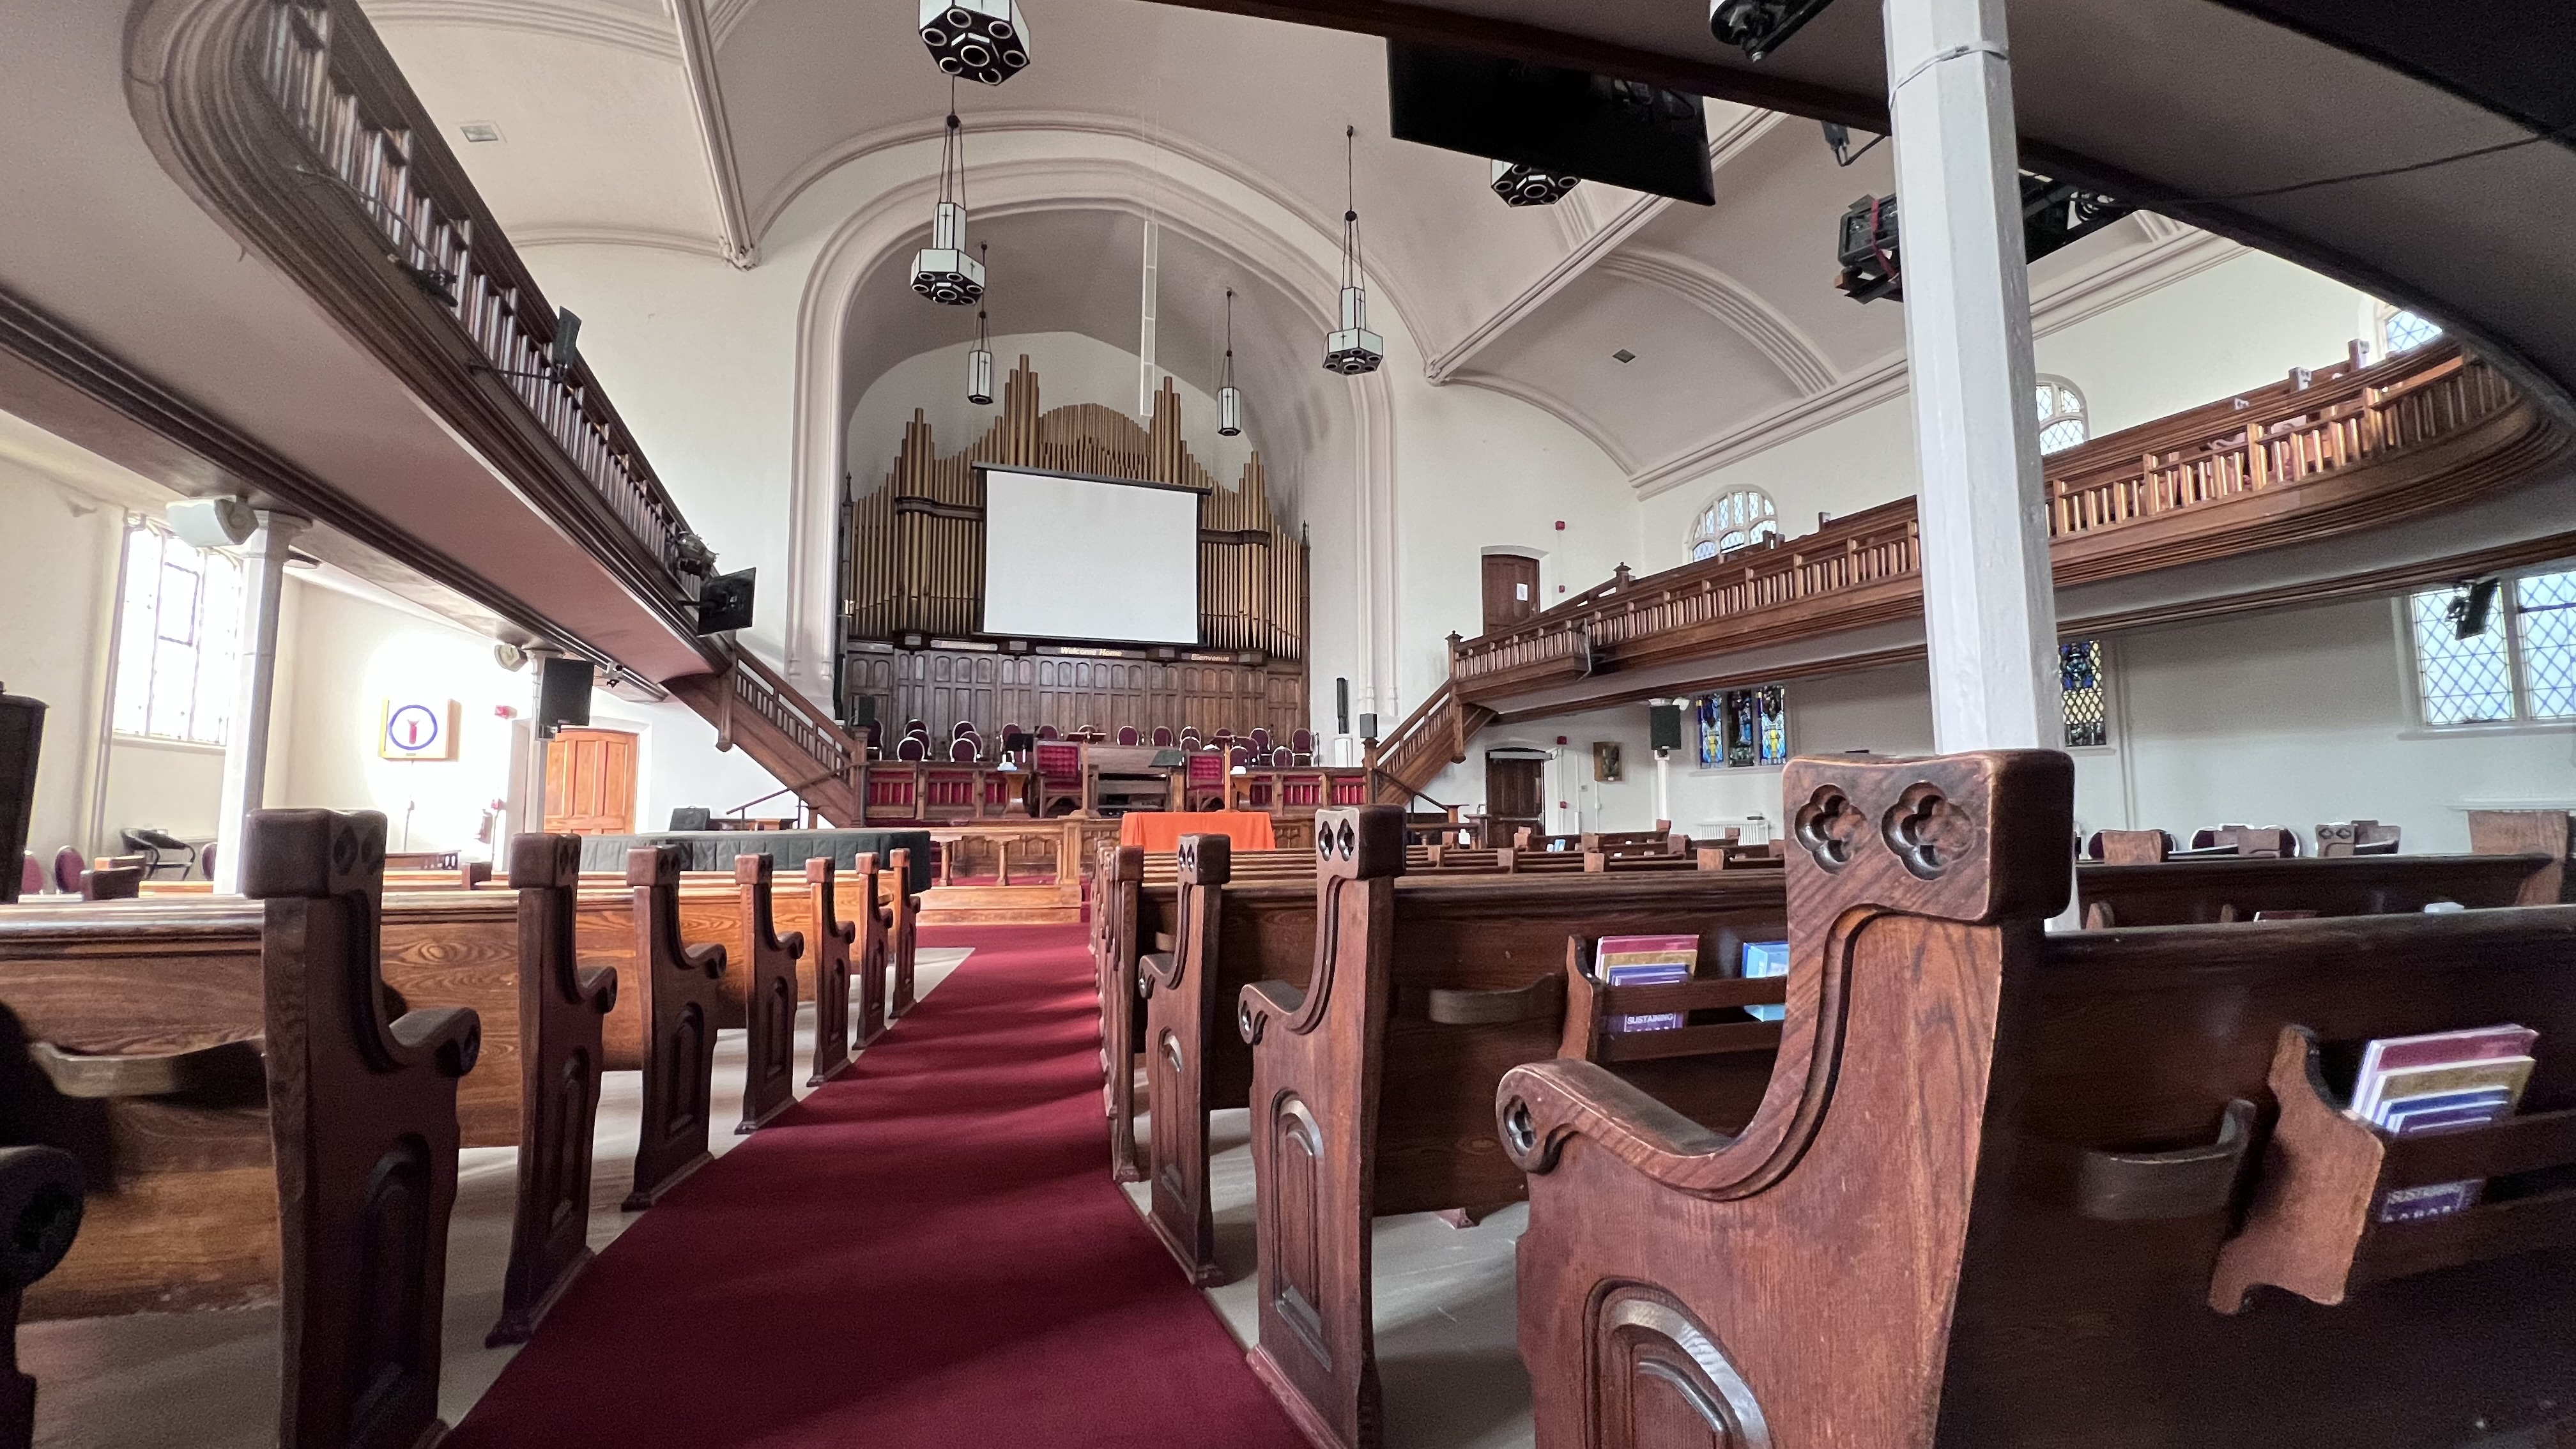 Picture of the Sanctuary of MCC Toronto after the renovations